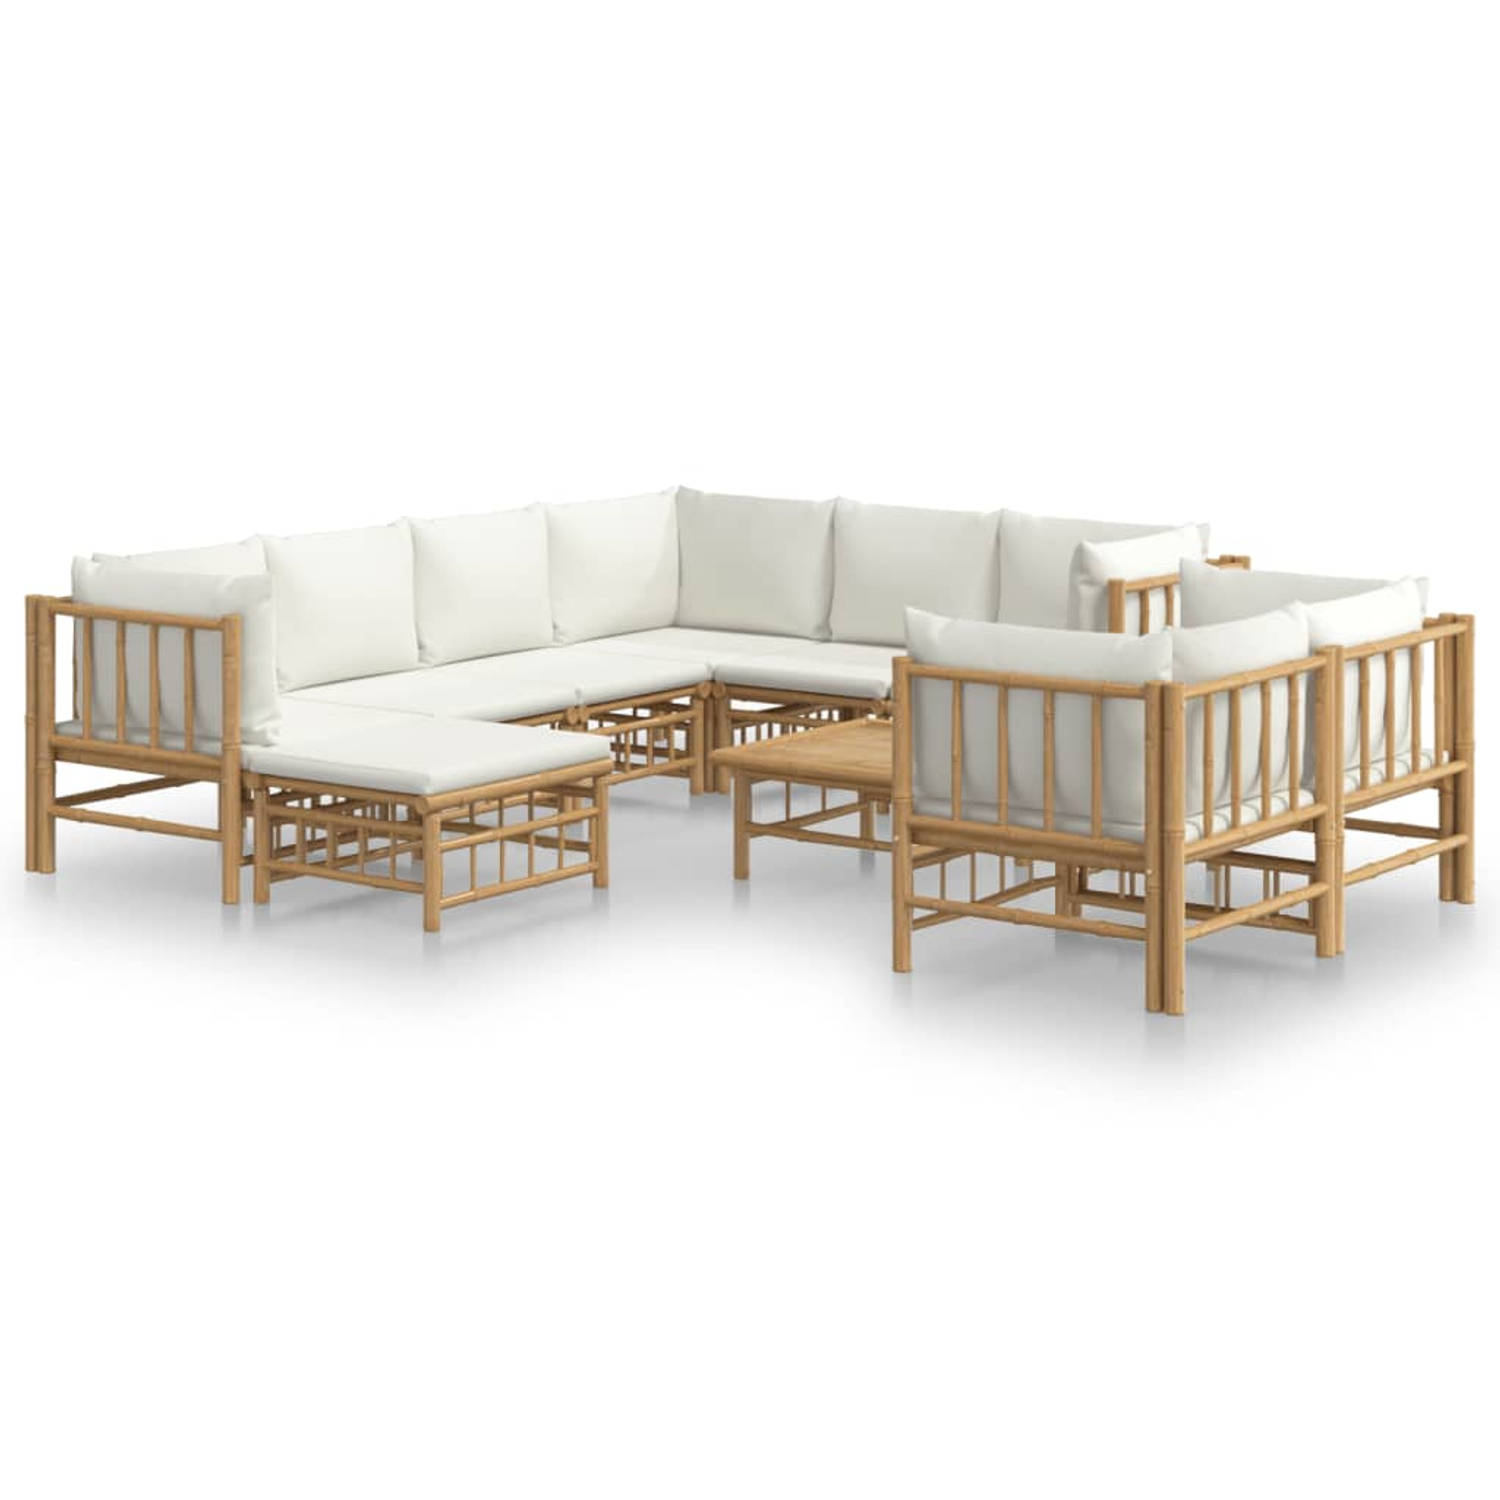 The Living Store 10-delige Loungeset met kussens bamboe crèmewit - Tuinset